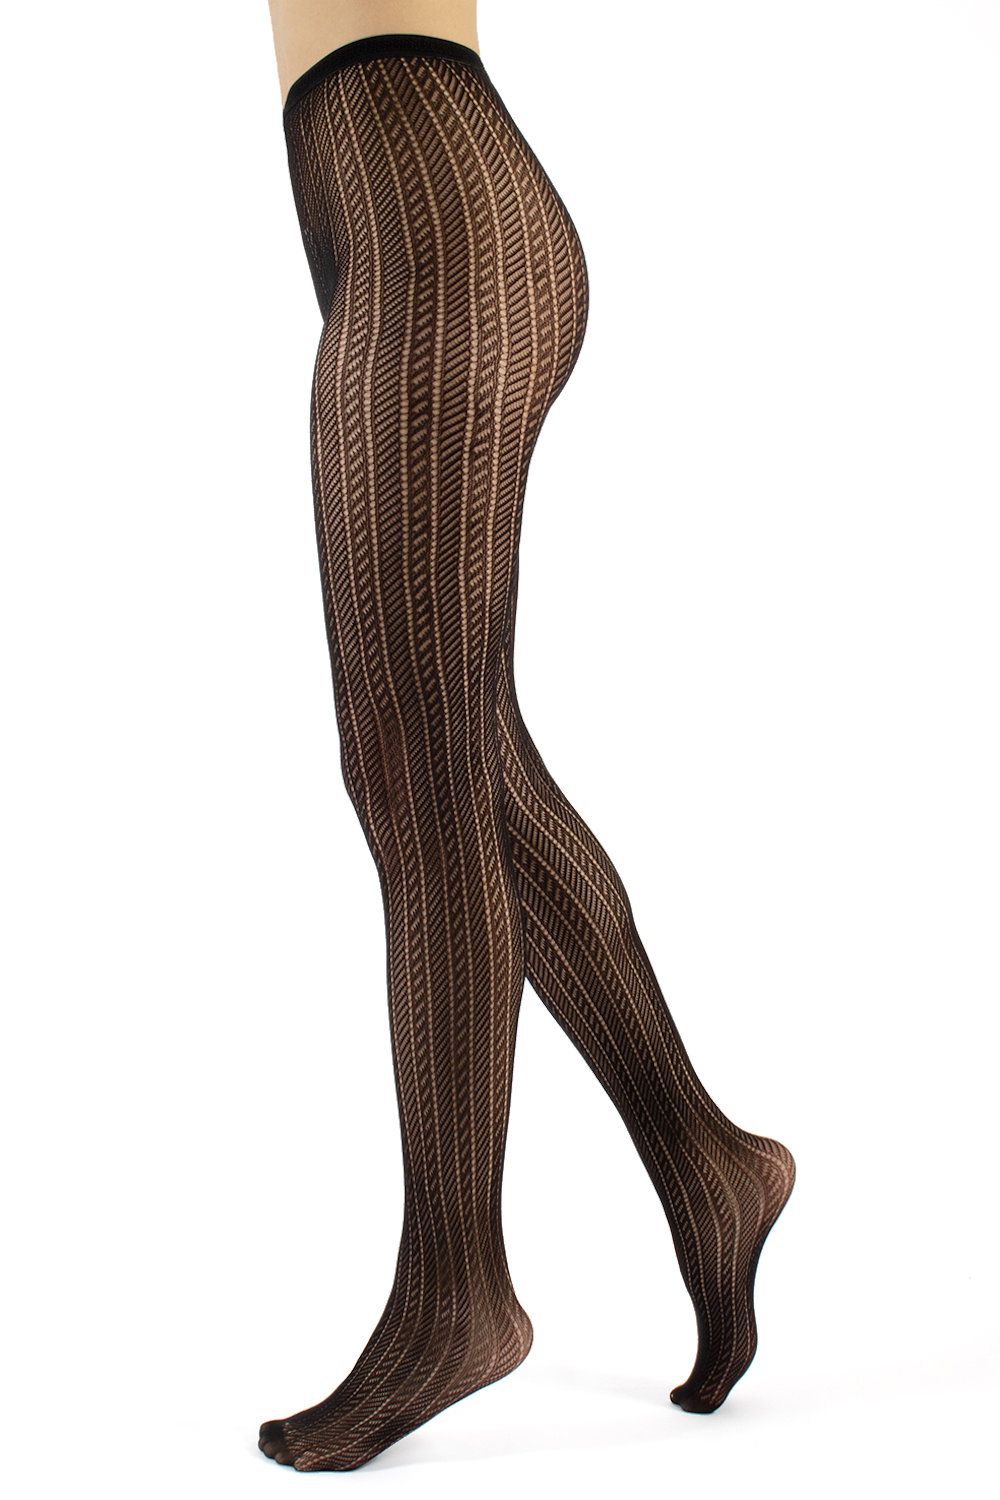 Wolford Sheer 15 Tights 3 For 2 Promotion In Stock At UK Tights